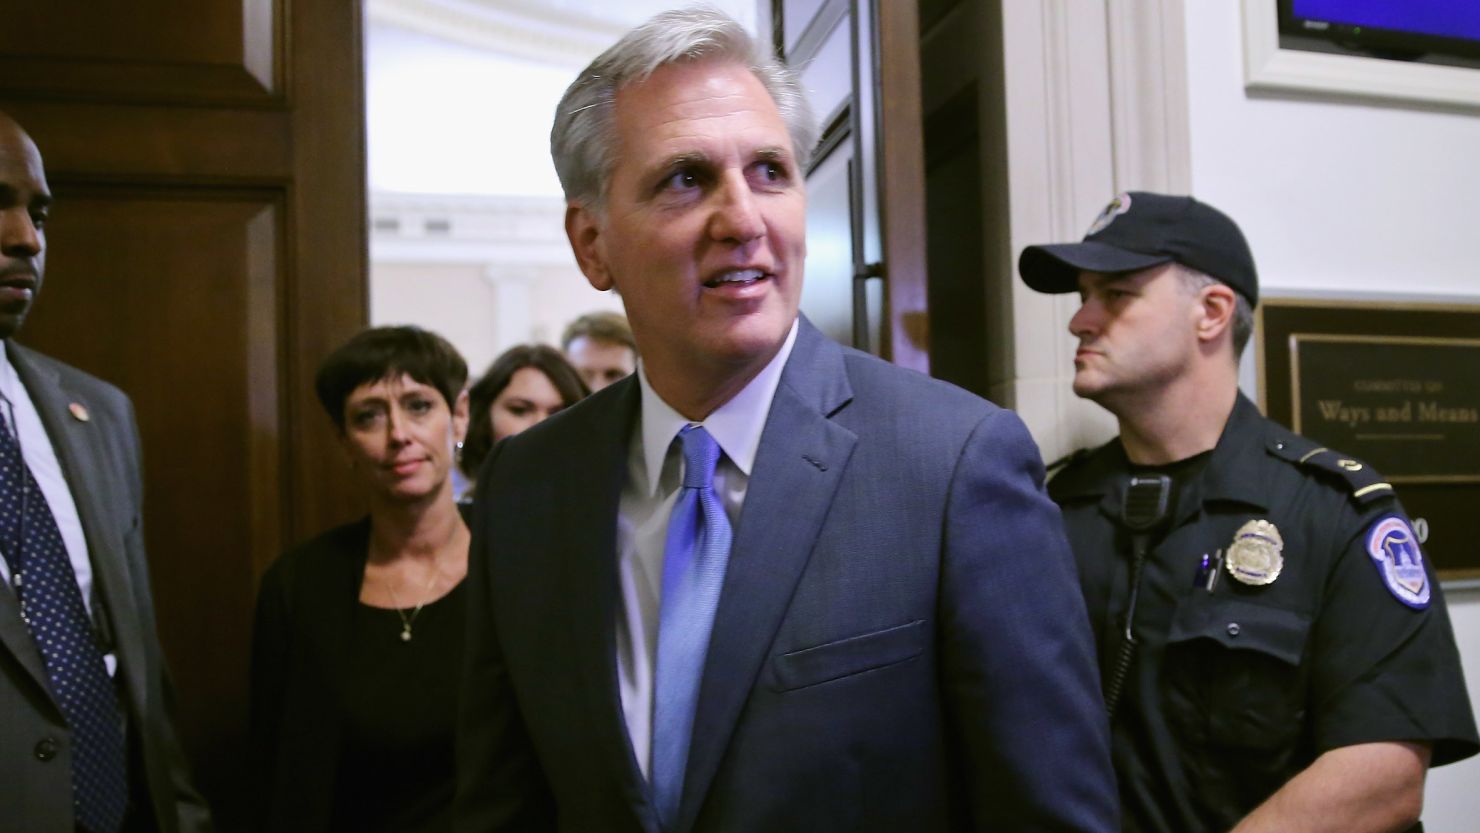 House Majority Leader Kevin McCarthy. (Photo by Chip Somodevilla/Getty Images)